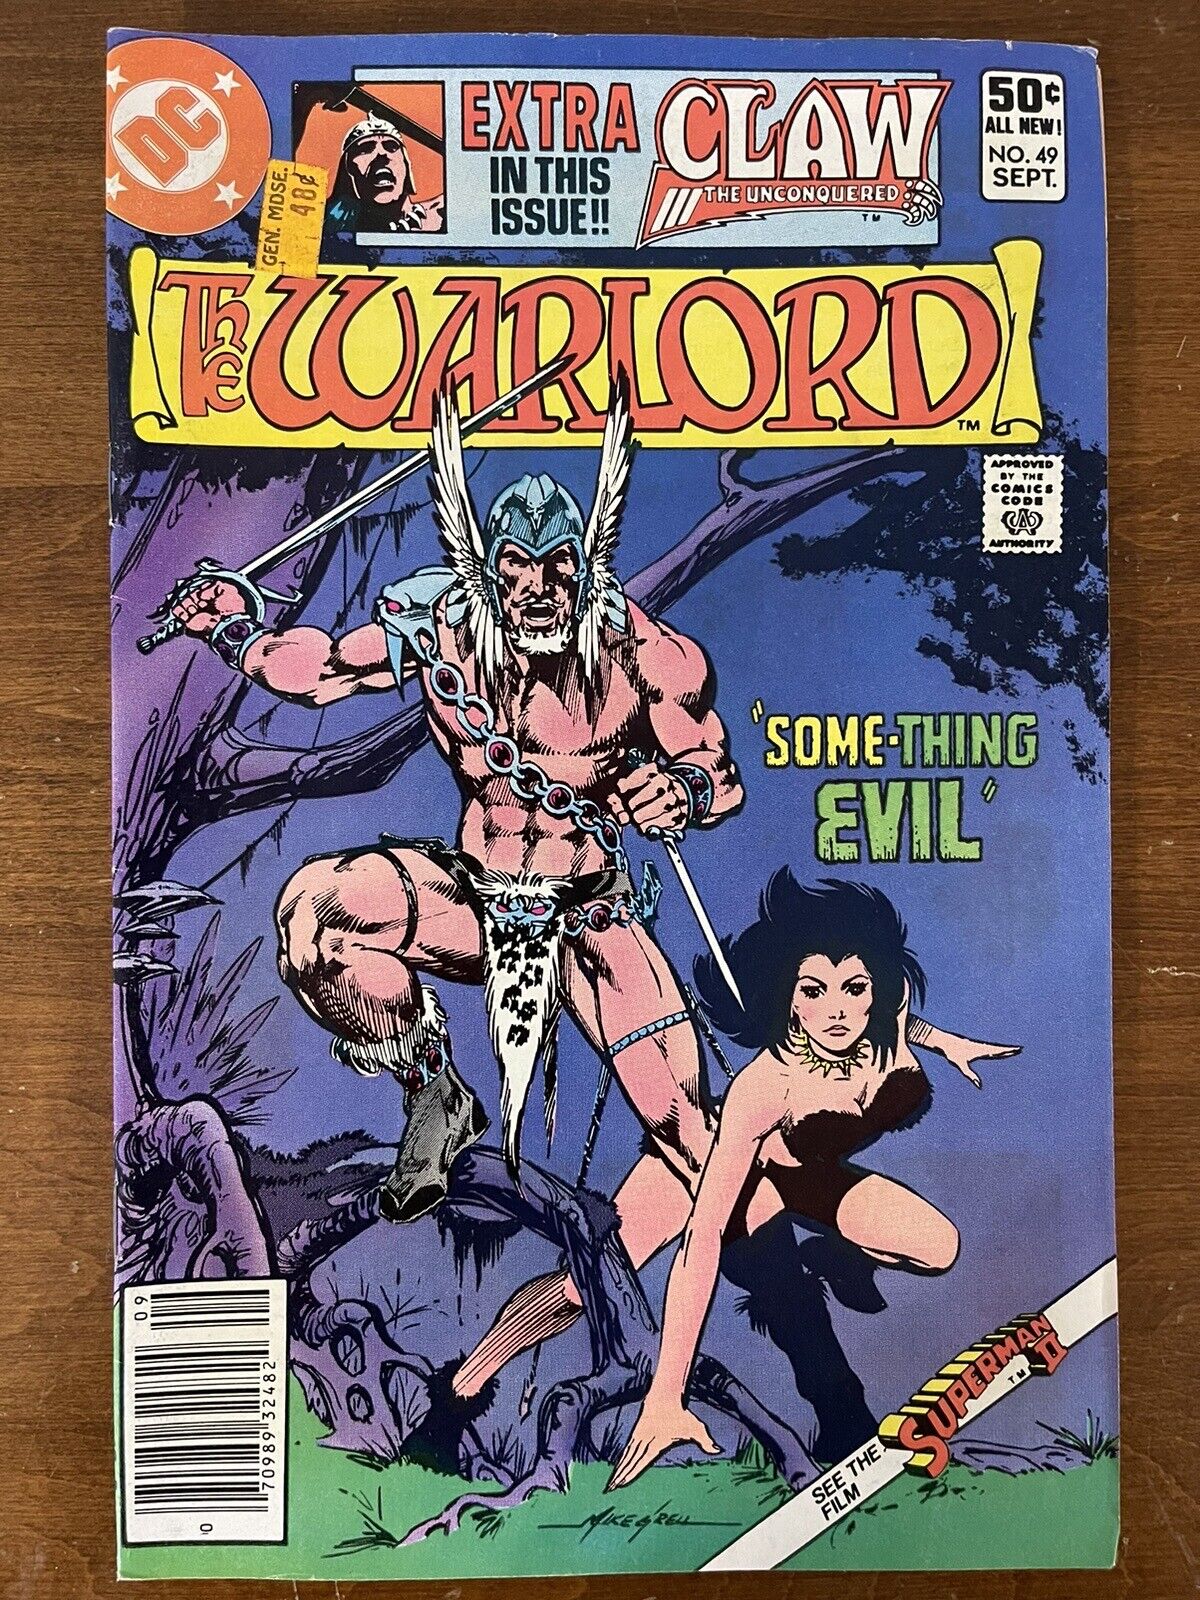 The Warlord #49 Something Evil (1981) DC Comics